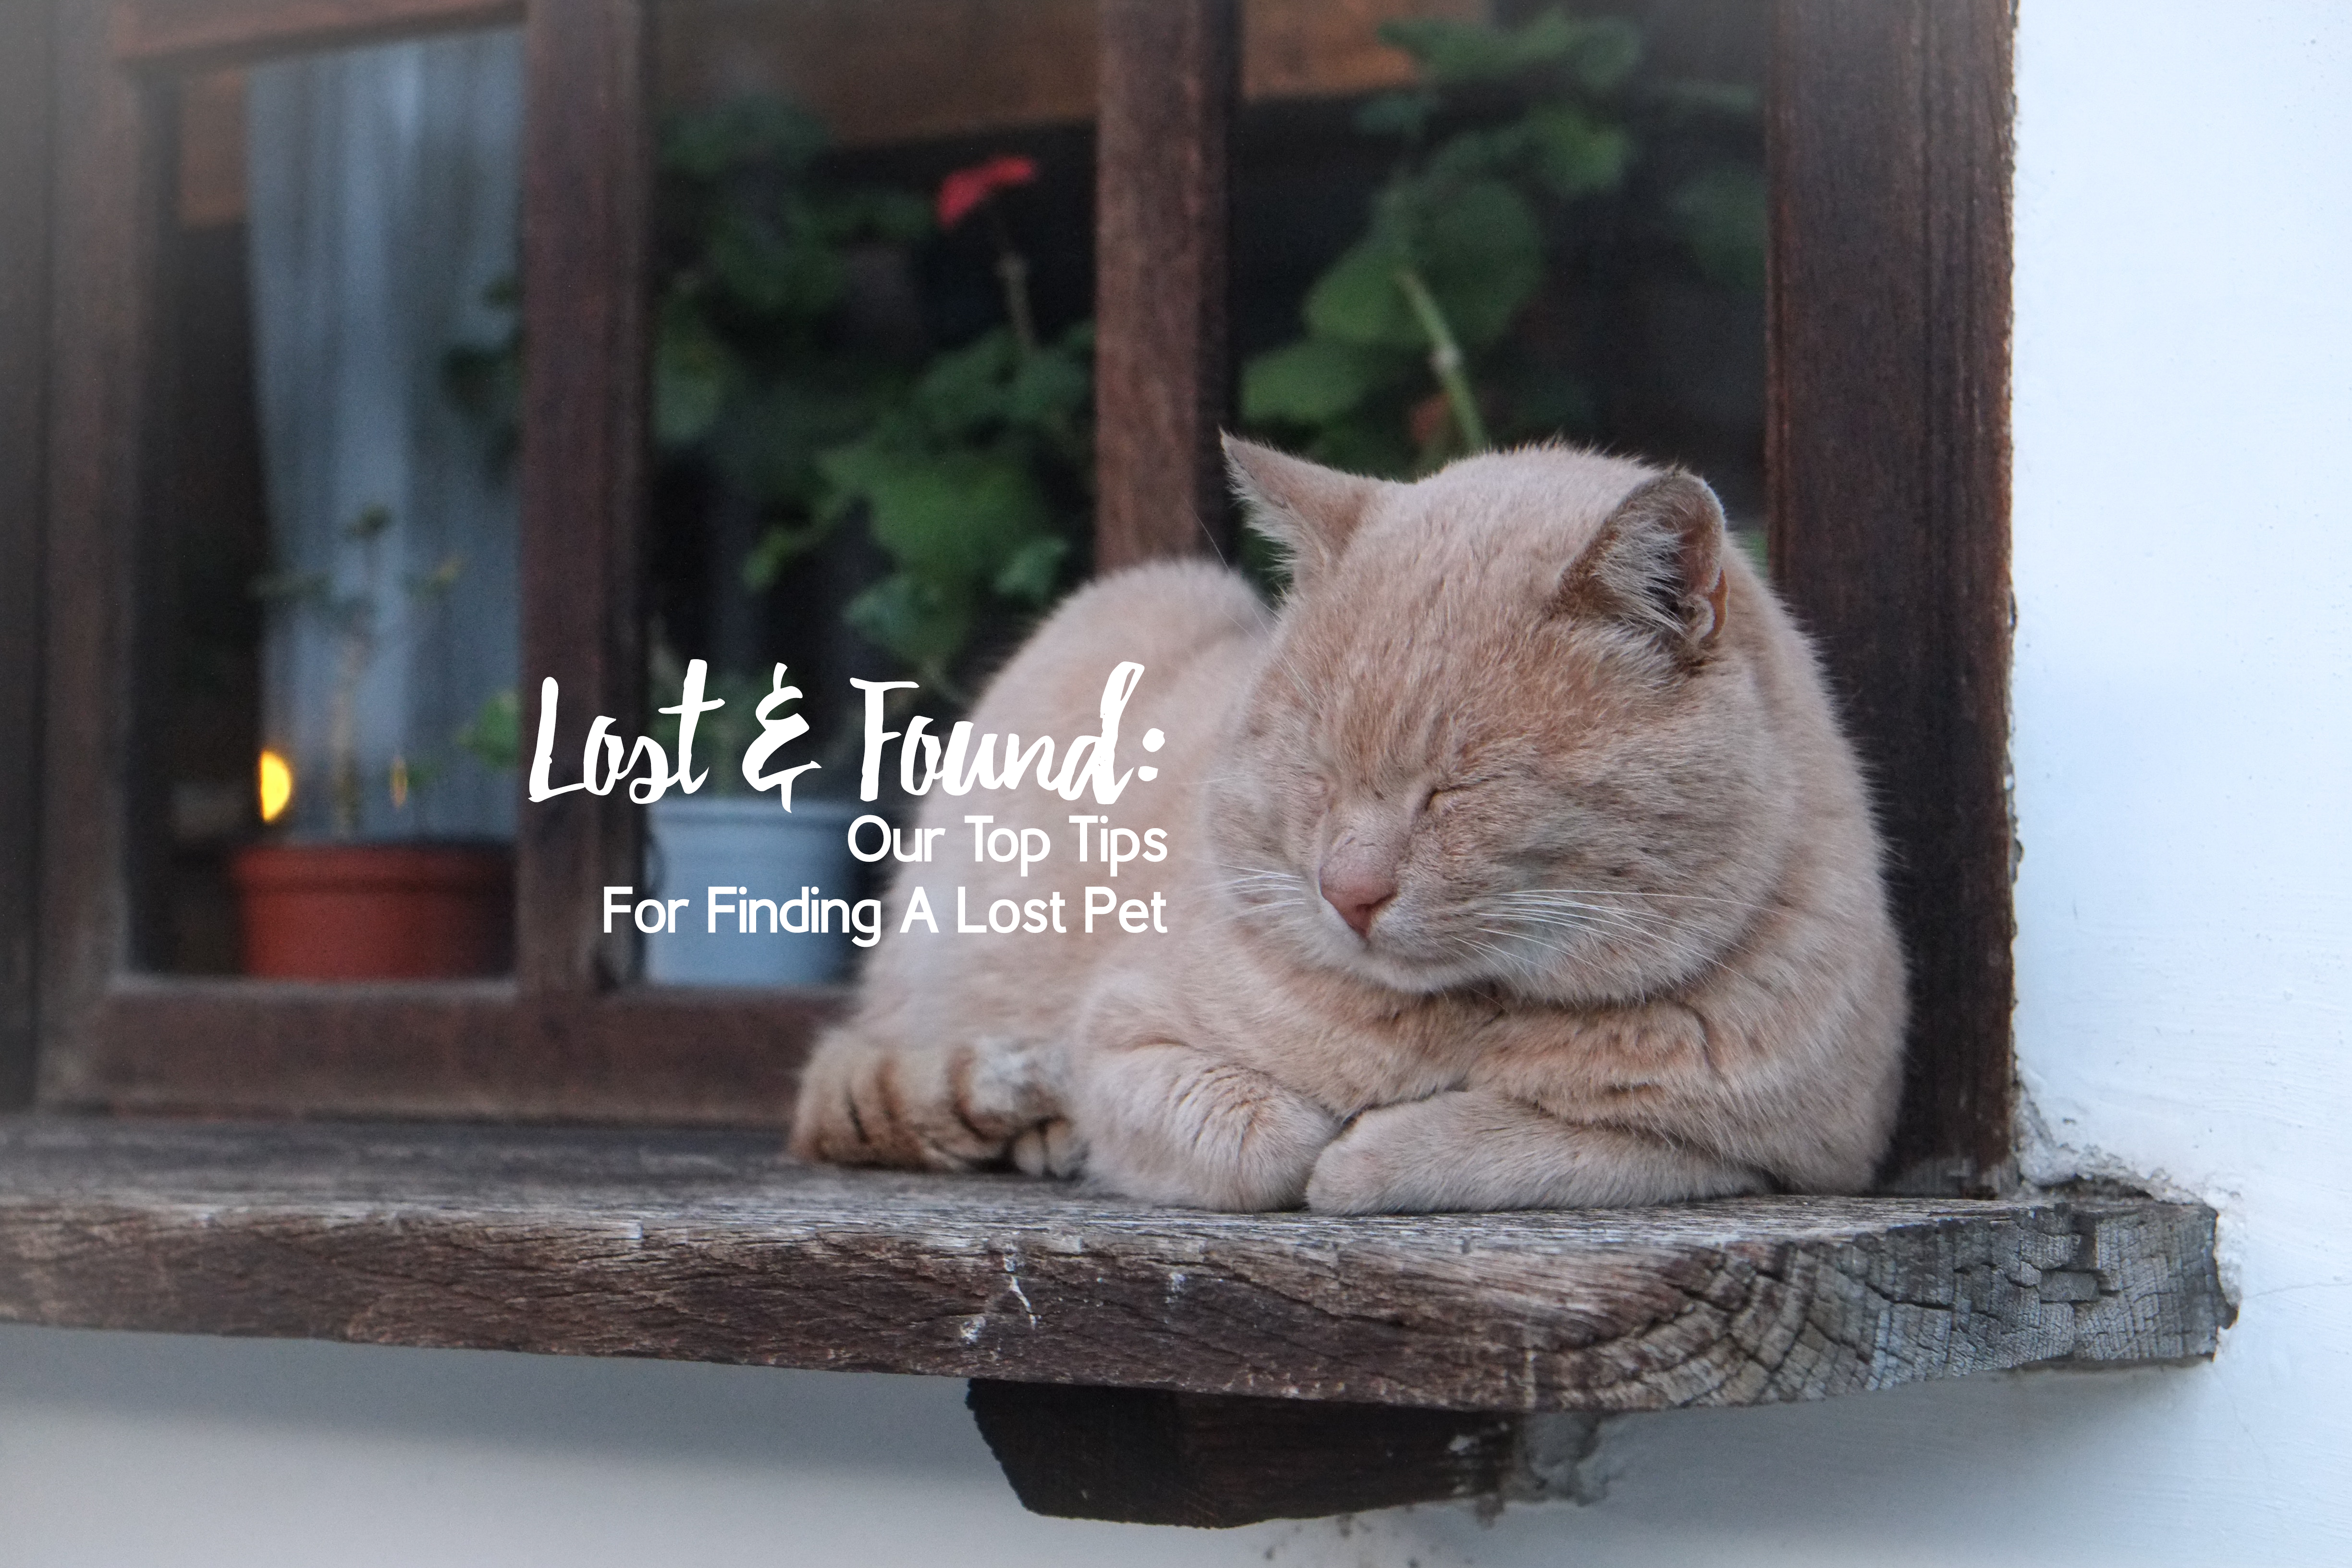 Lost & Found: Our Top Tips For Finding A Lost Pet